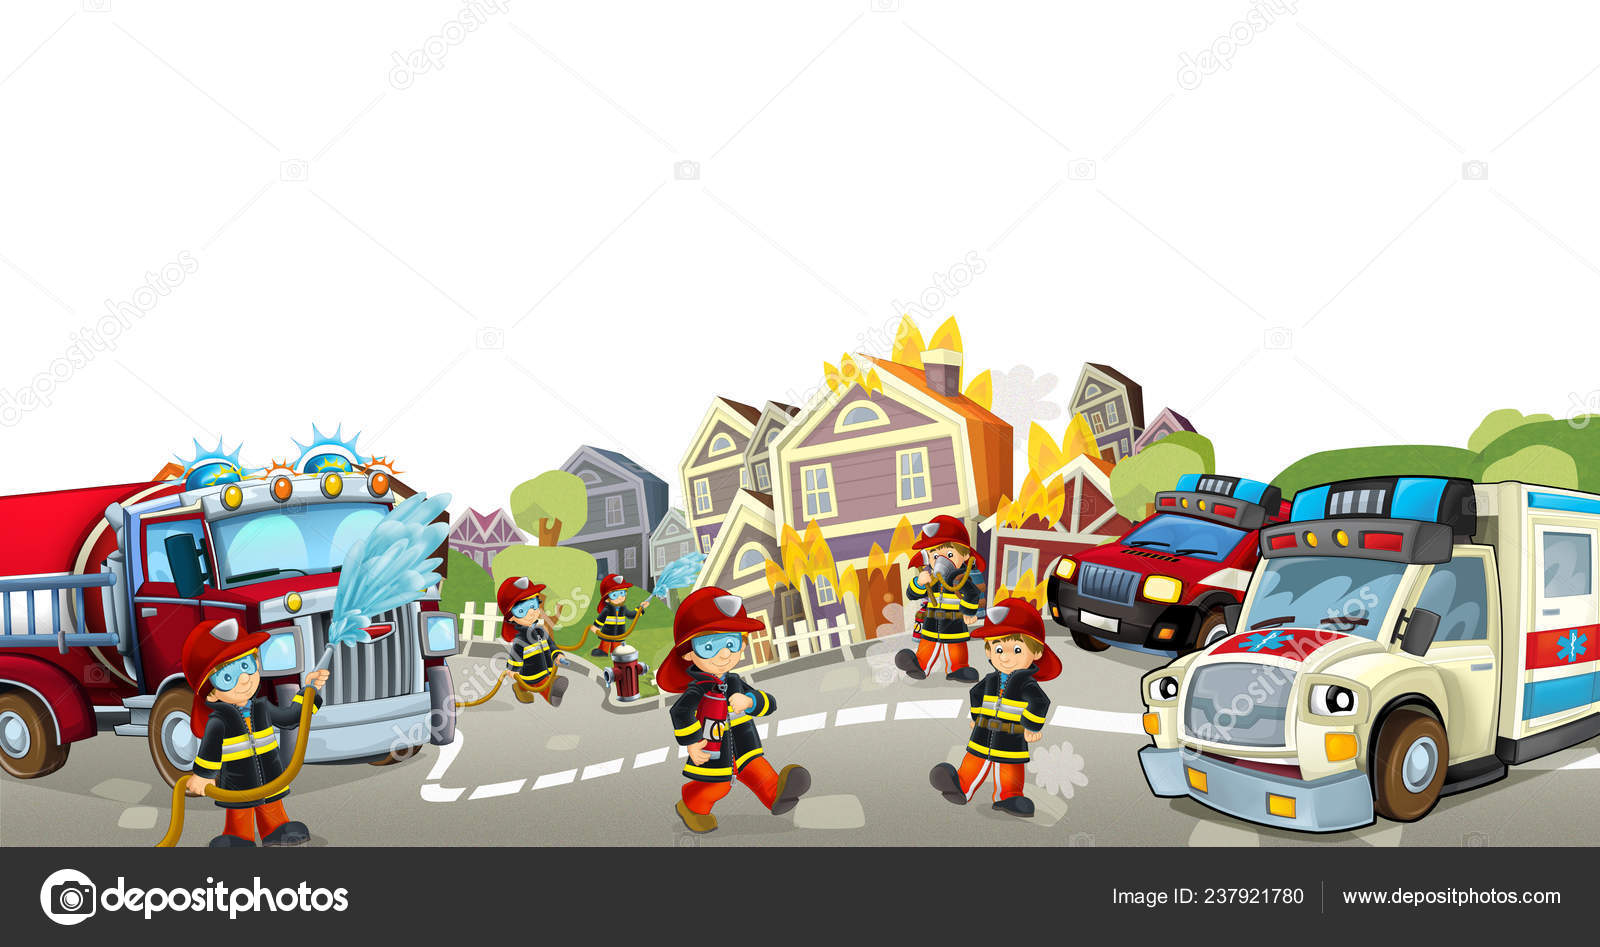 Cartoon Illustration Fire Fighters Cars Work Putting Out Fire Ambulance  Stock Photo by ©illustrator_hft 237921780